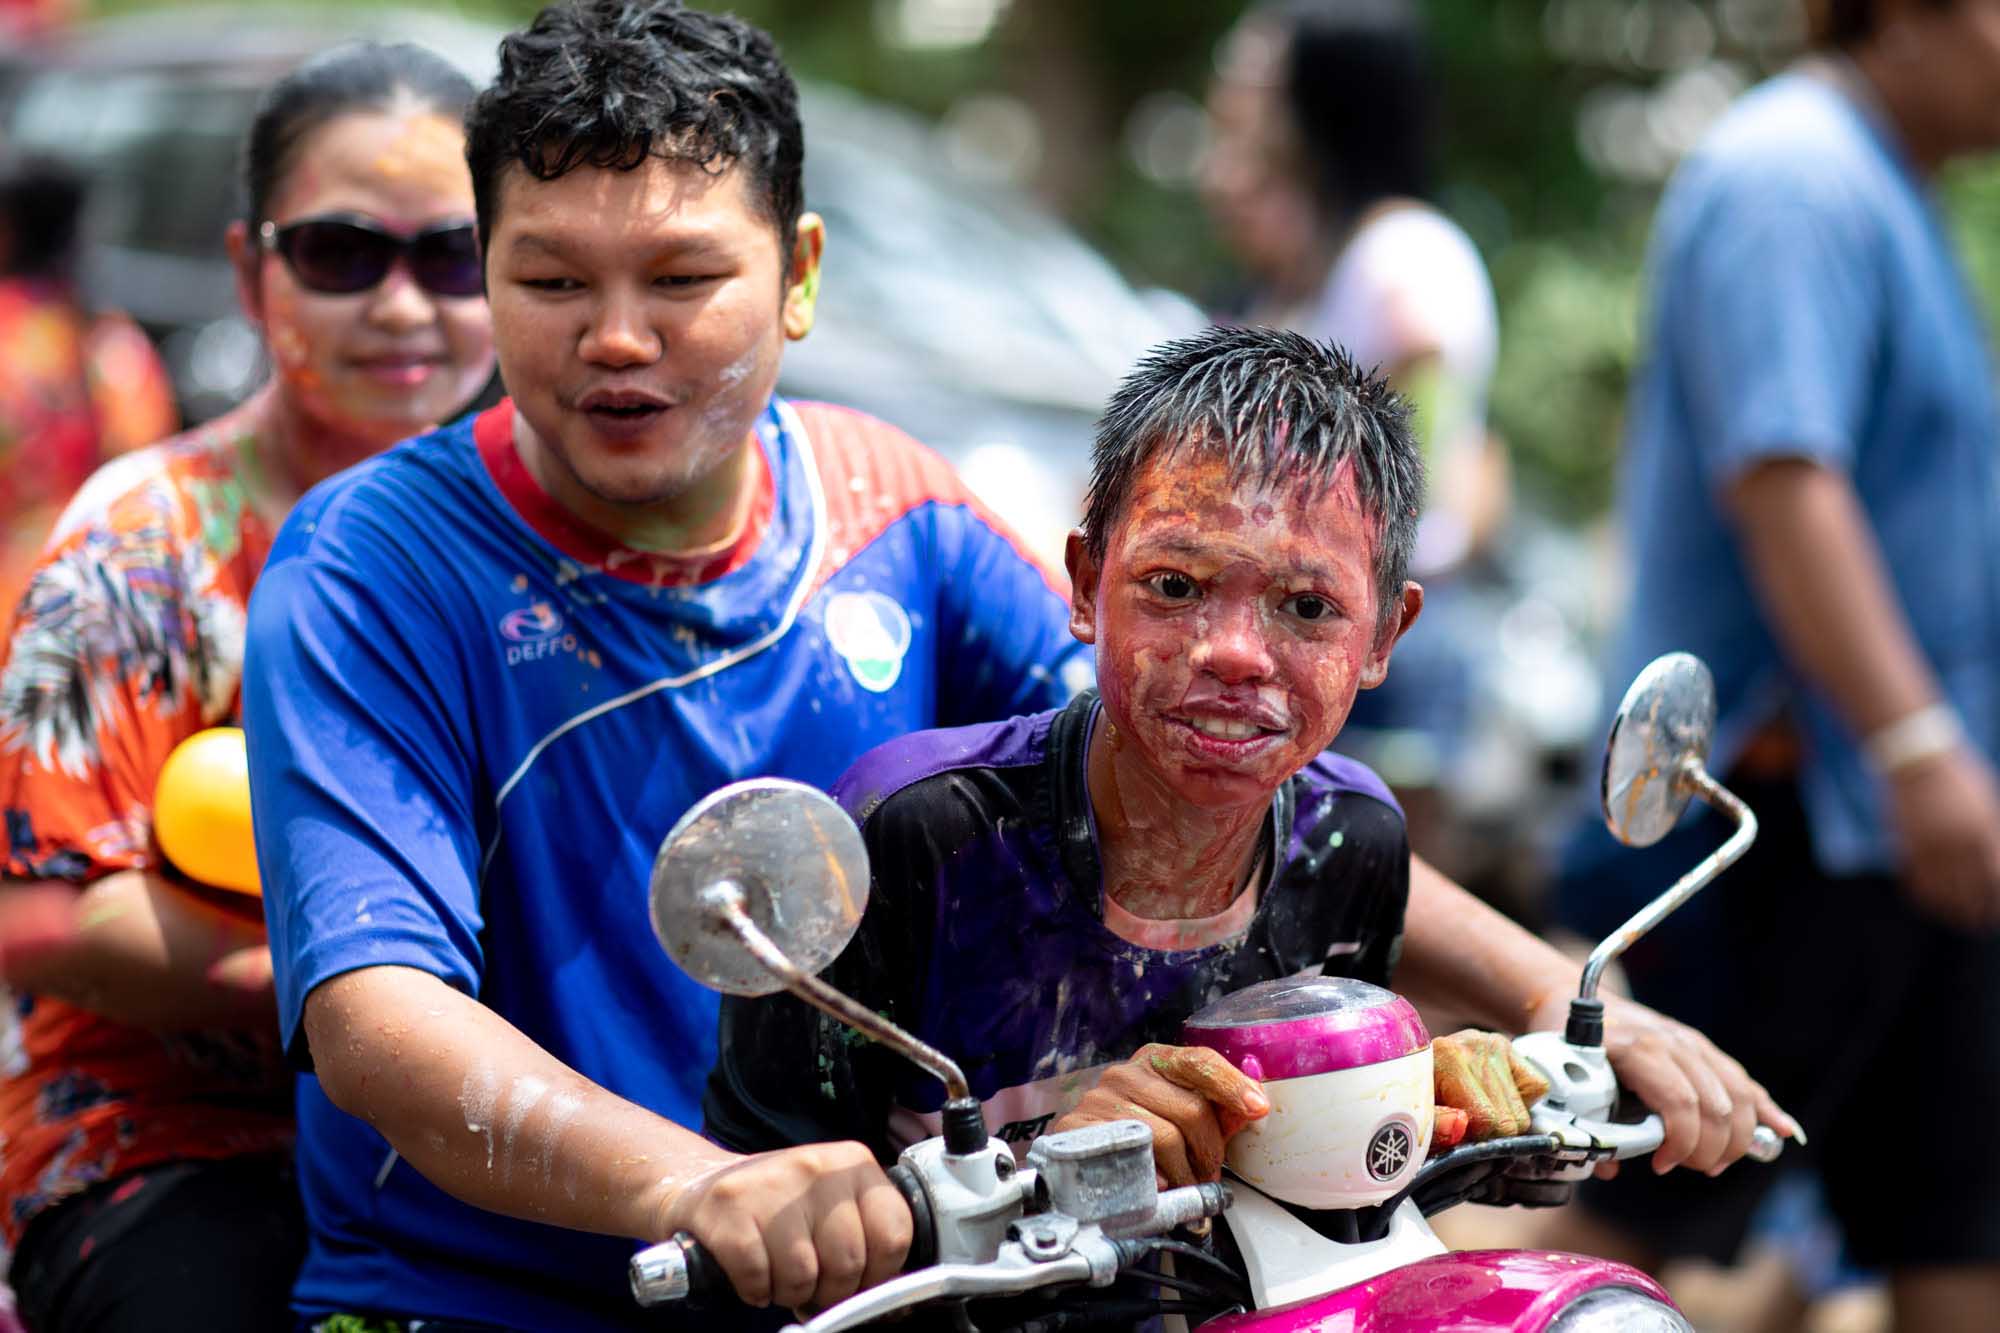 Three boys with painted faces on a motorcycle during Songkran water festival in Phuket, Thailand | Street Photography | Travel Photography | Festival Photography